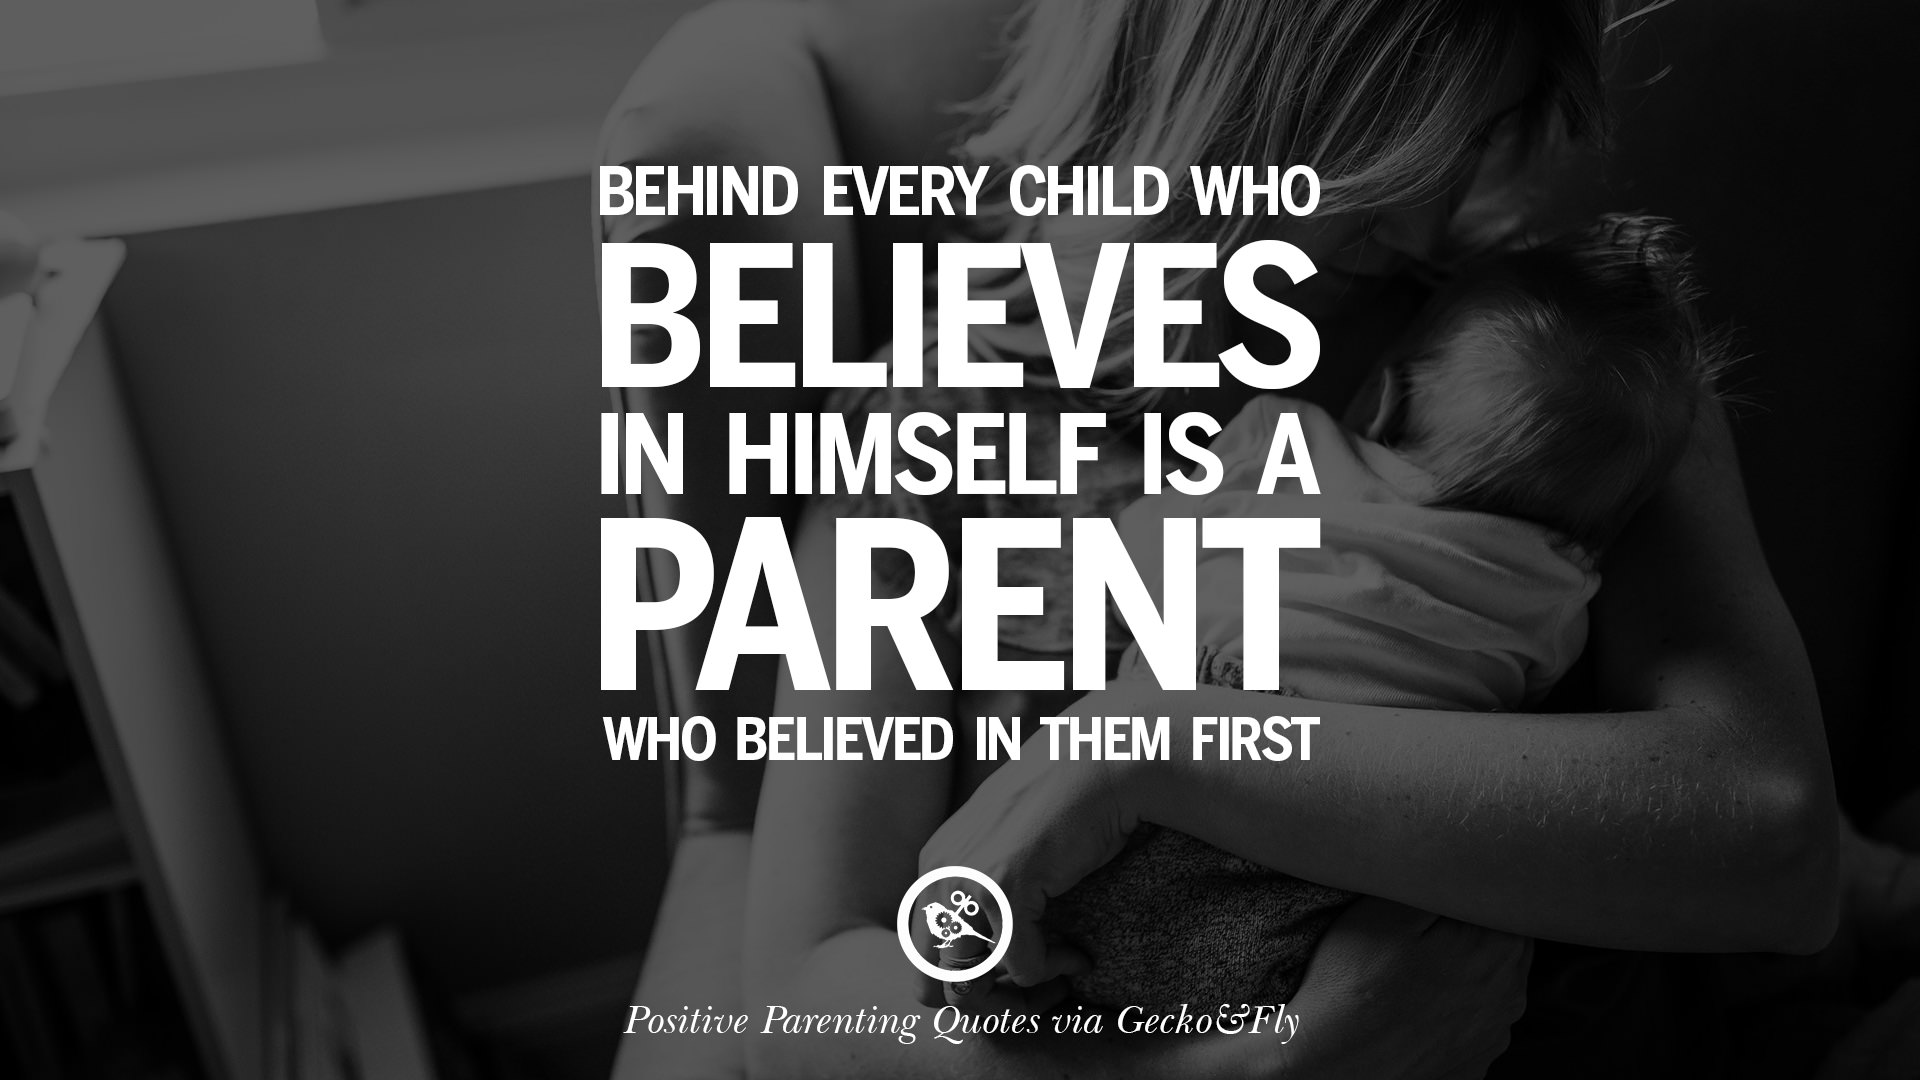 Raising Children with Trust, Love and Support - NL Today